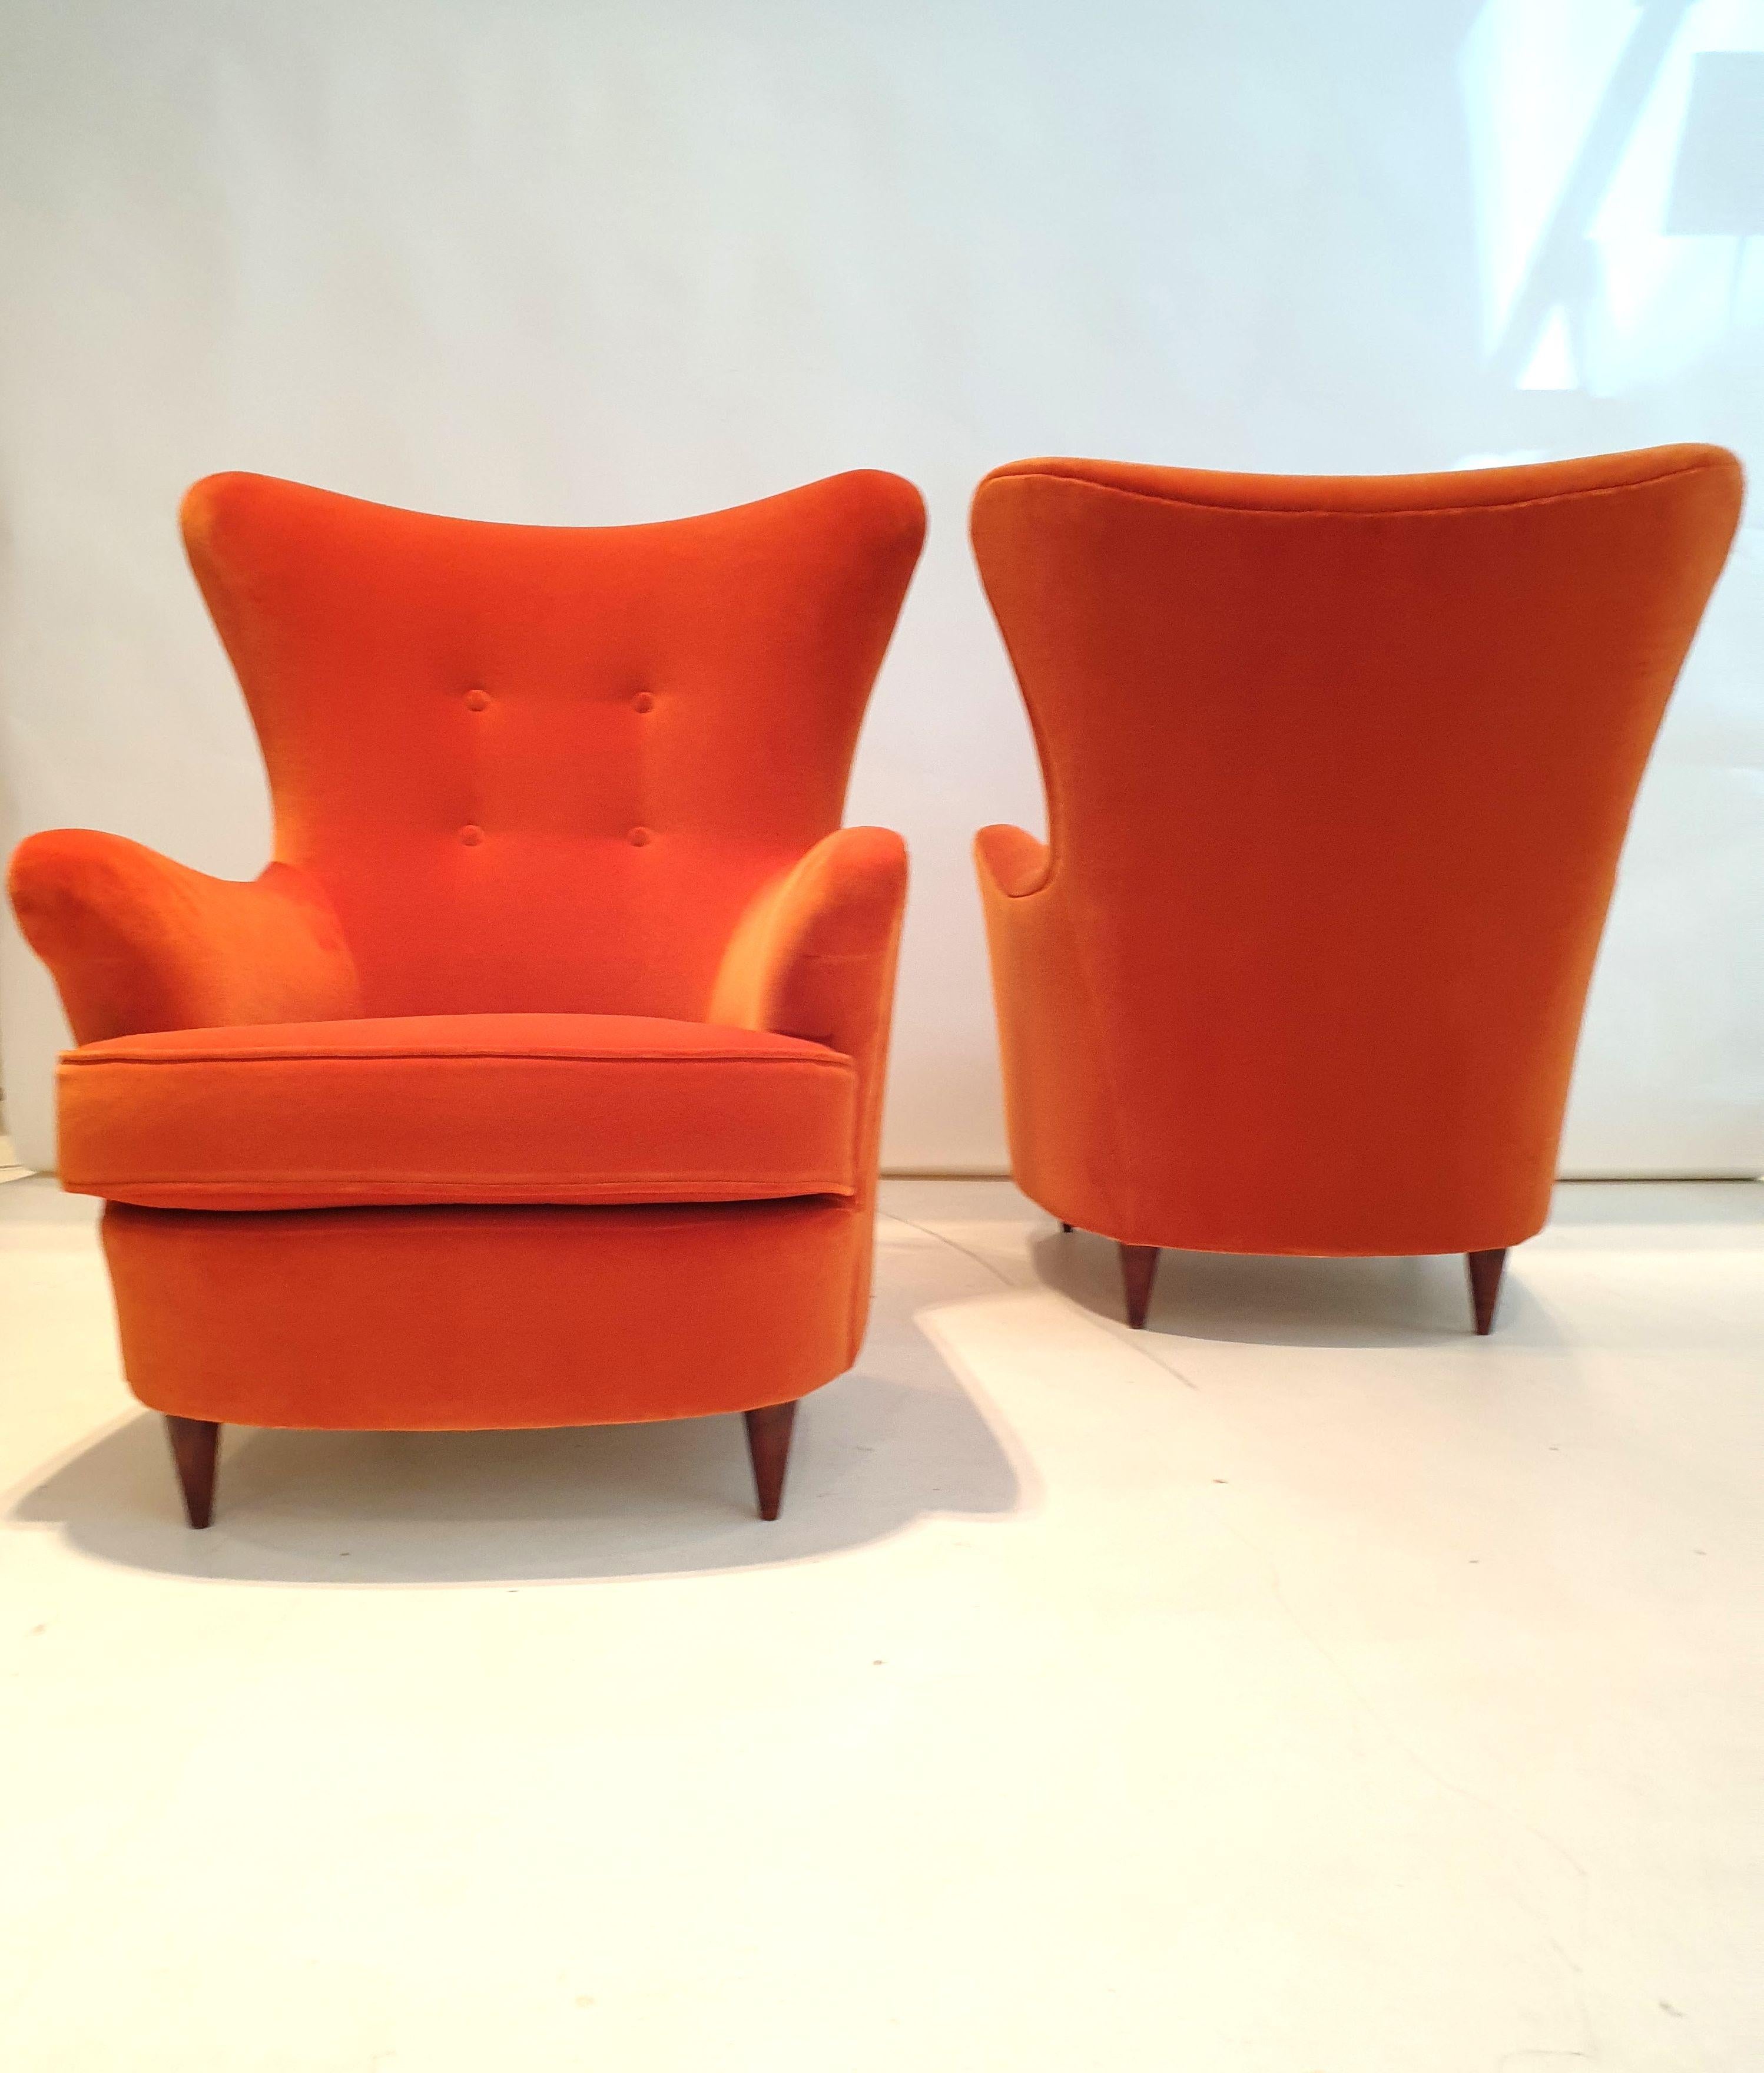 Pair of stylized armchairs with polished wooden feet, reupholstered in burnt orange velvet.